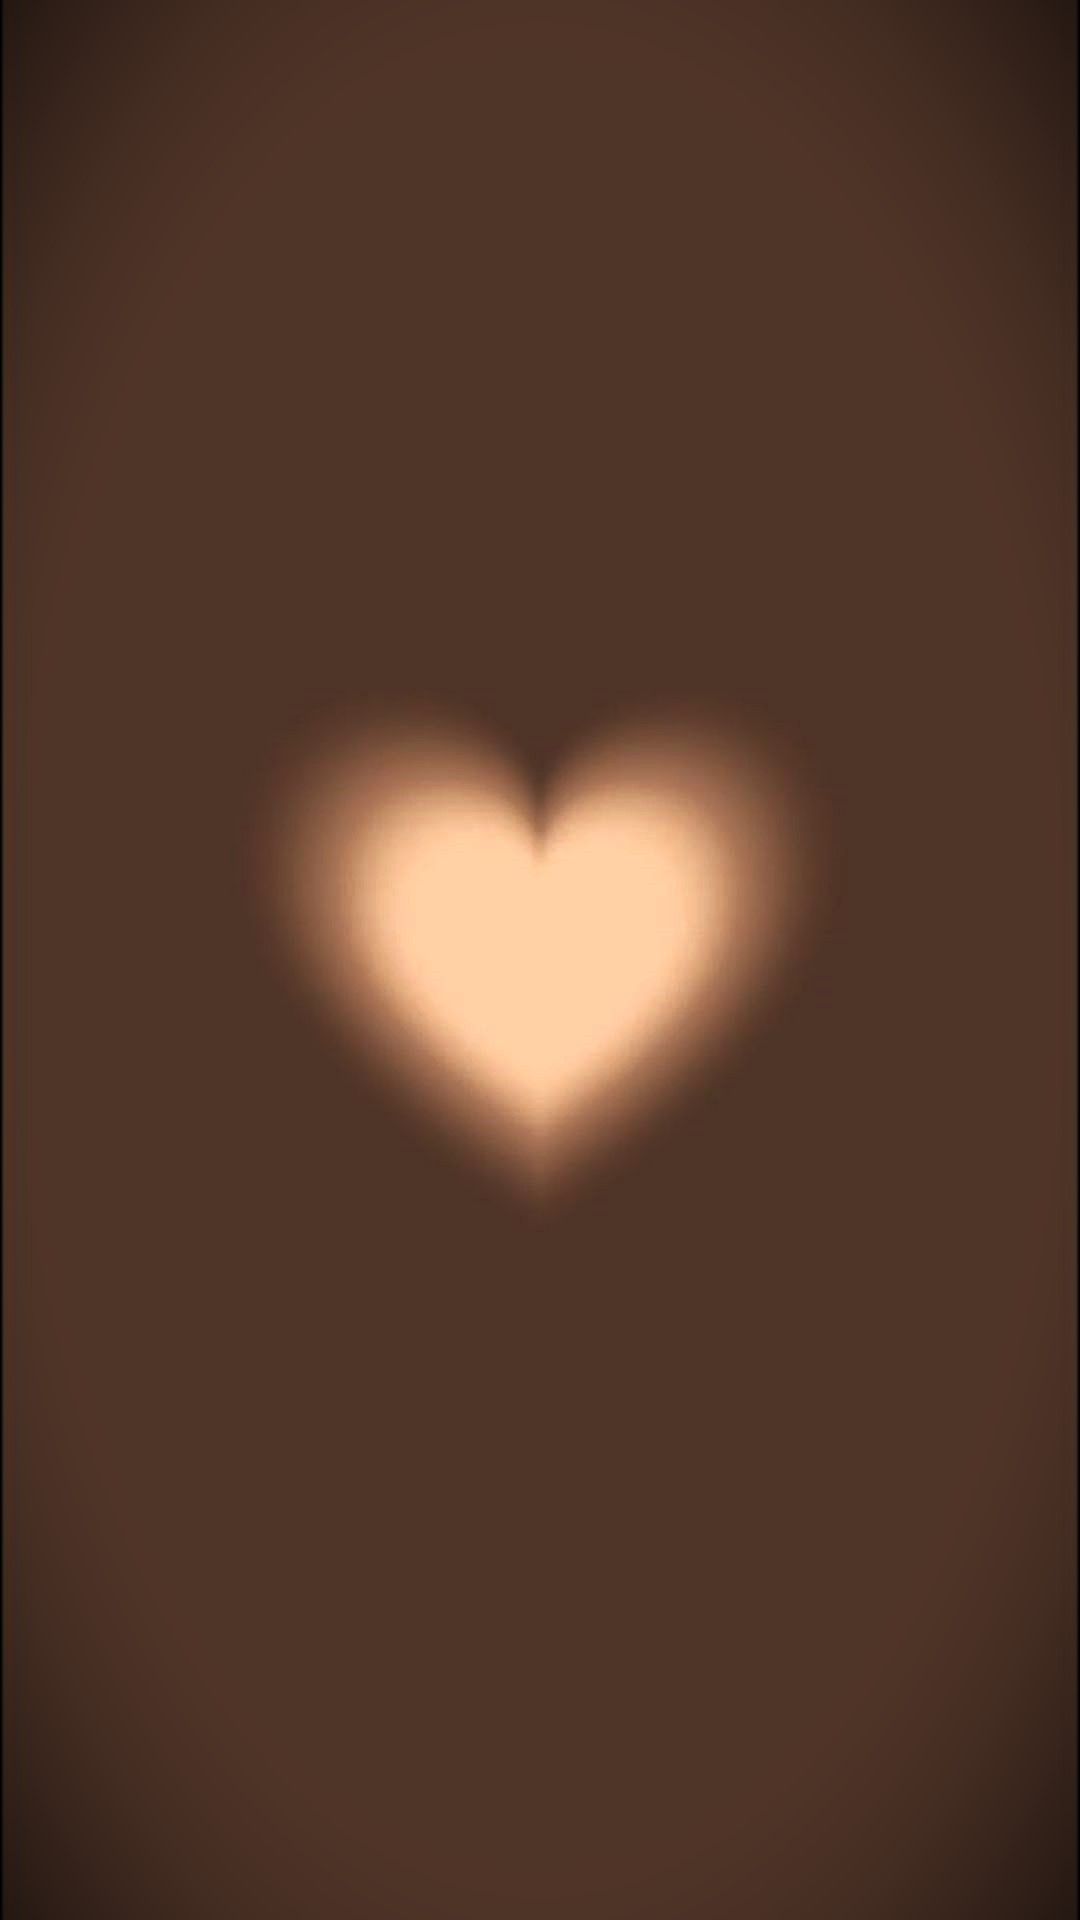 A heart shaped light is shown on the wall - Brown